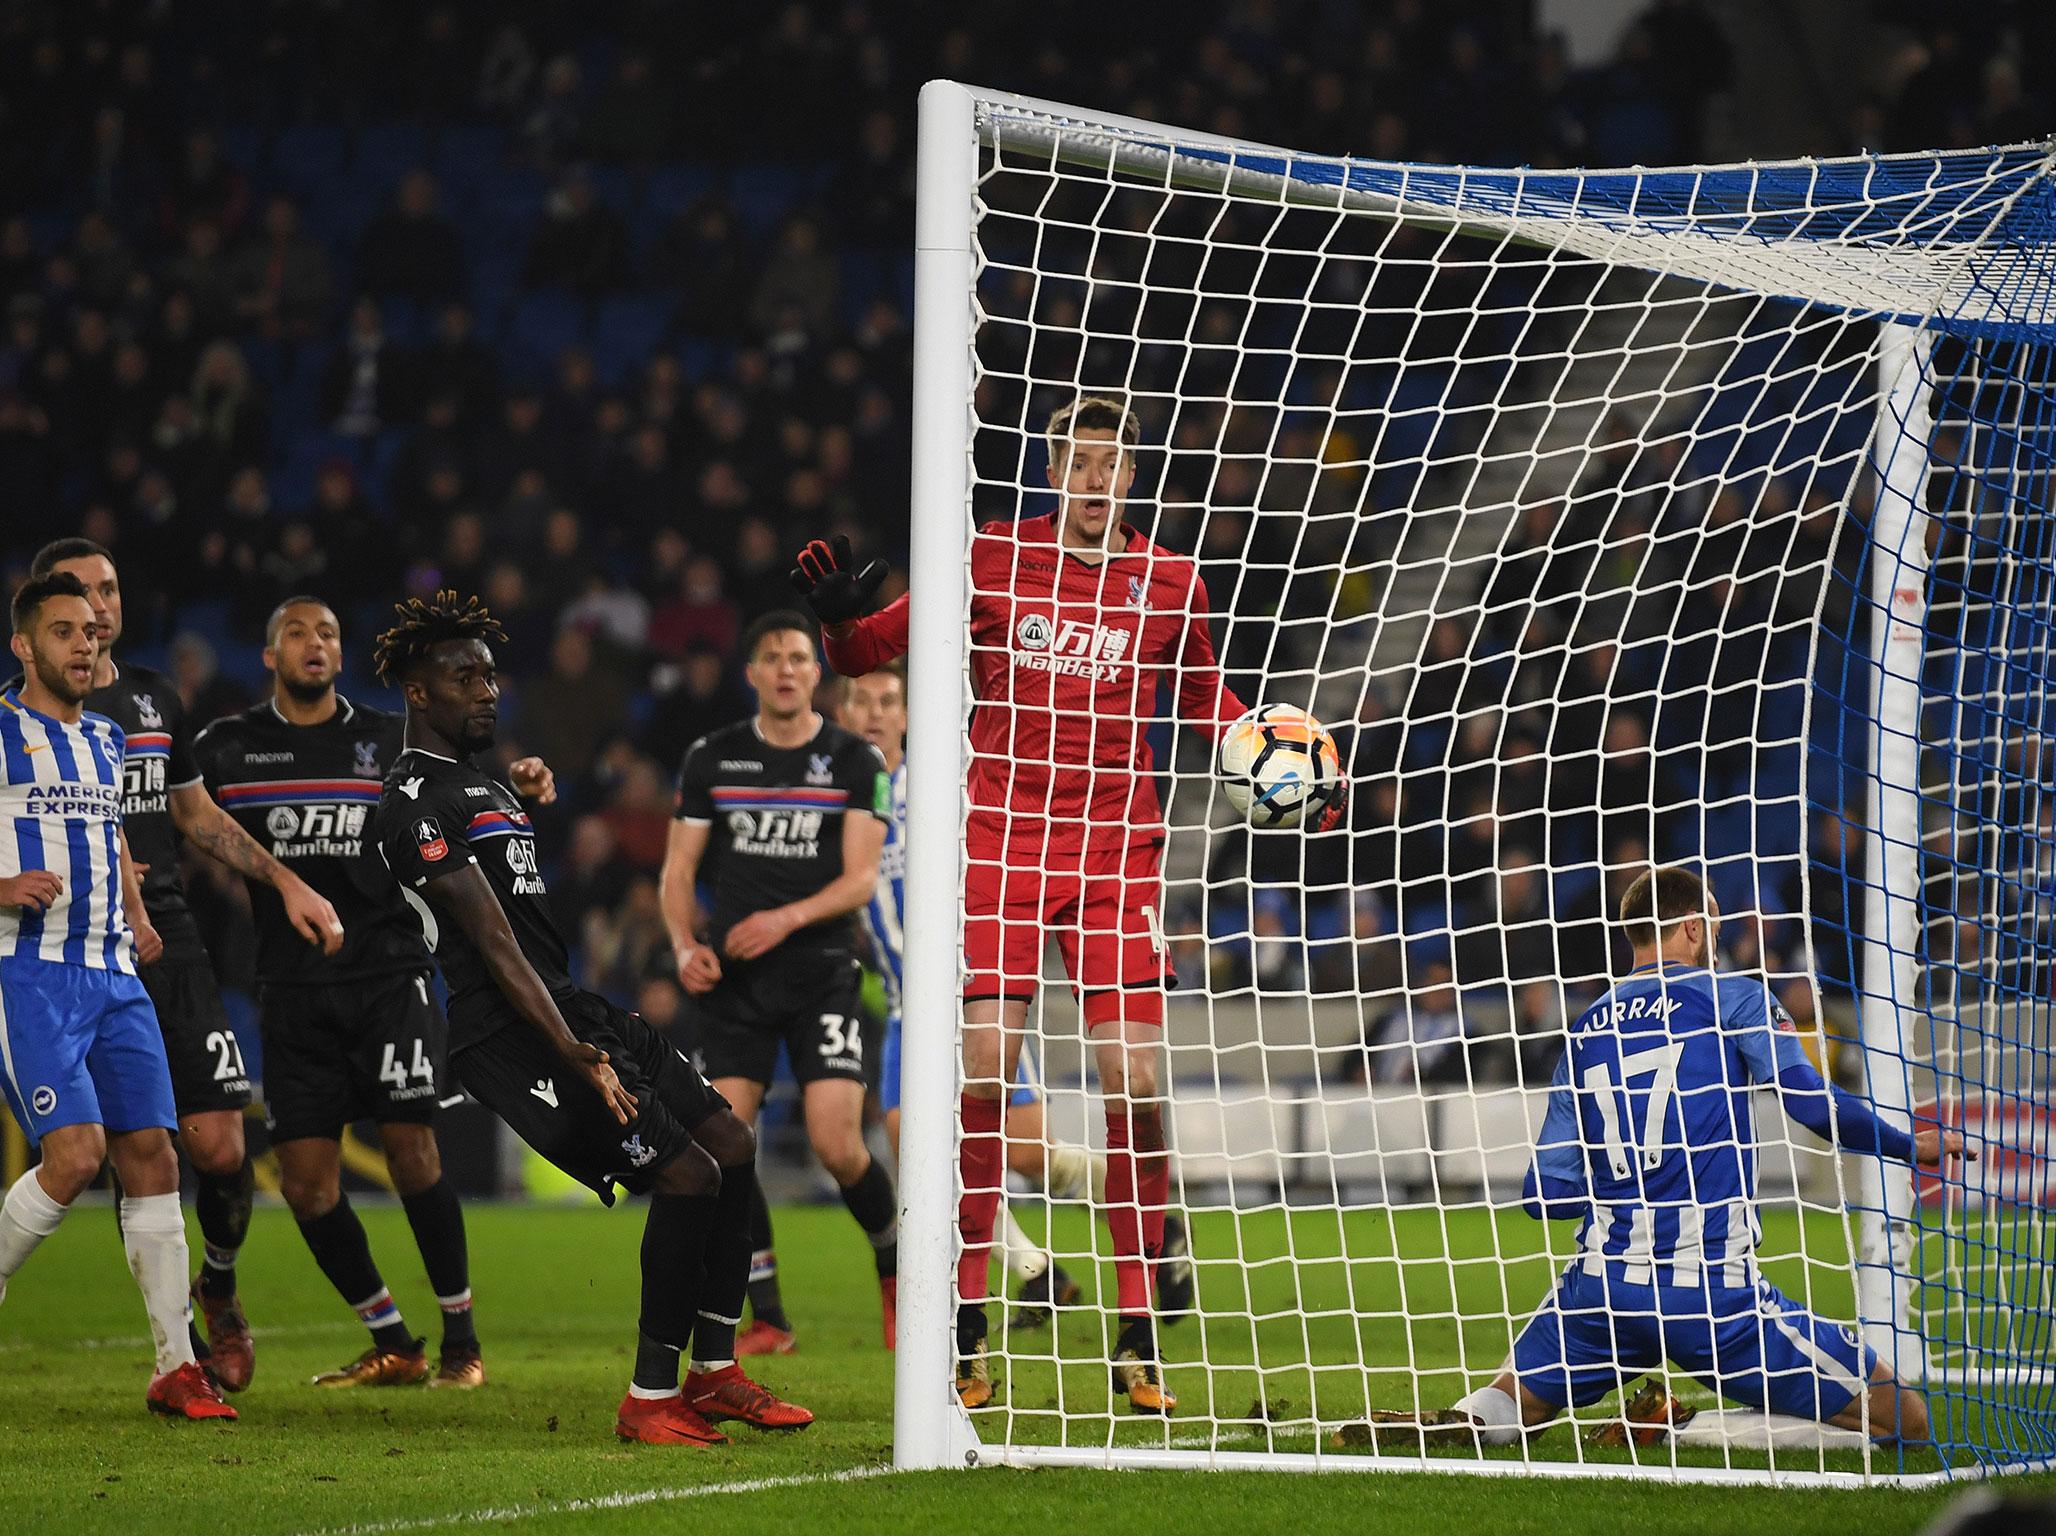 Glenn Murray’s late winner was reviewed and approved by VAR on Monday night